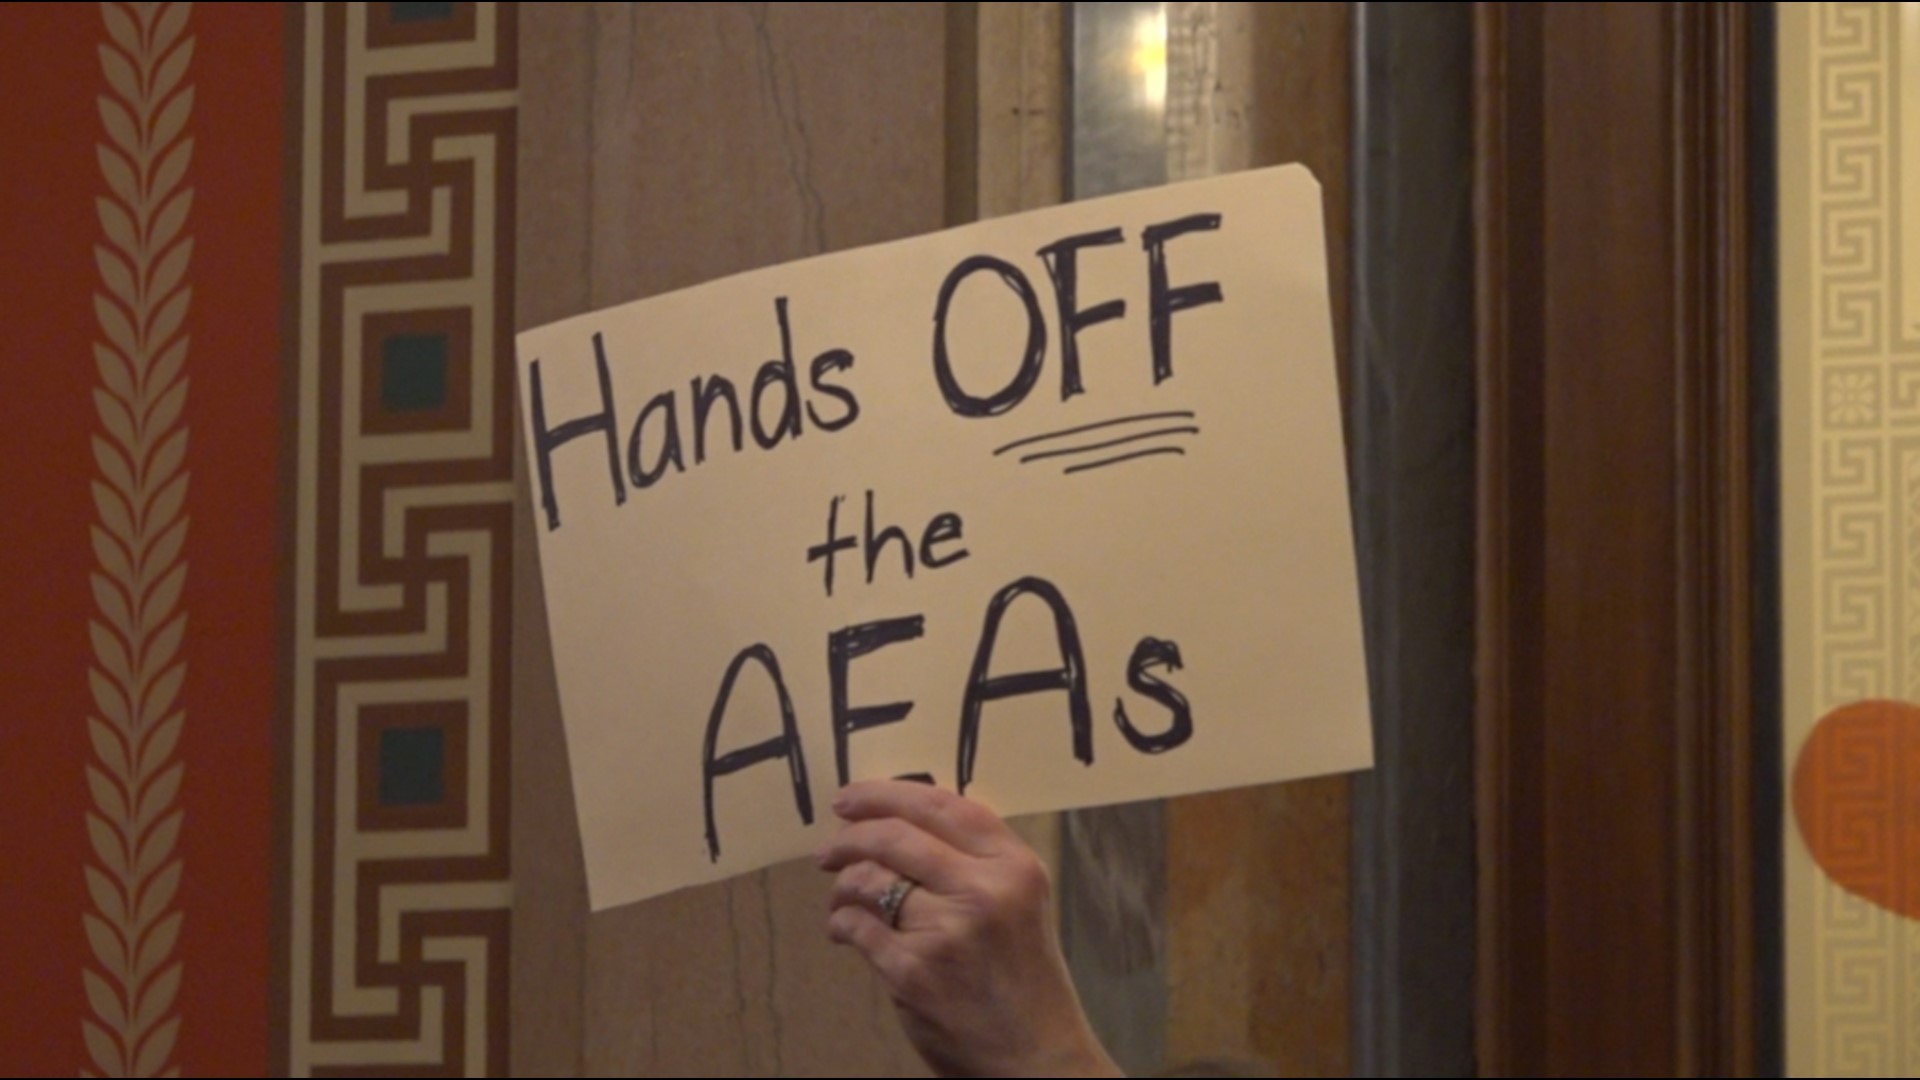 AEAs across the state are seeing a decrease in workers after Gov. Reynolds signed a law giving schools more control of funds for AEA services.